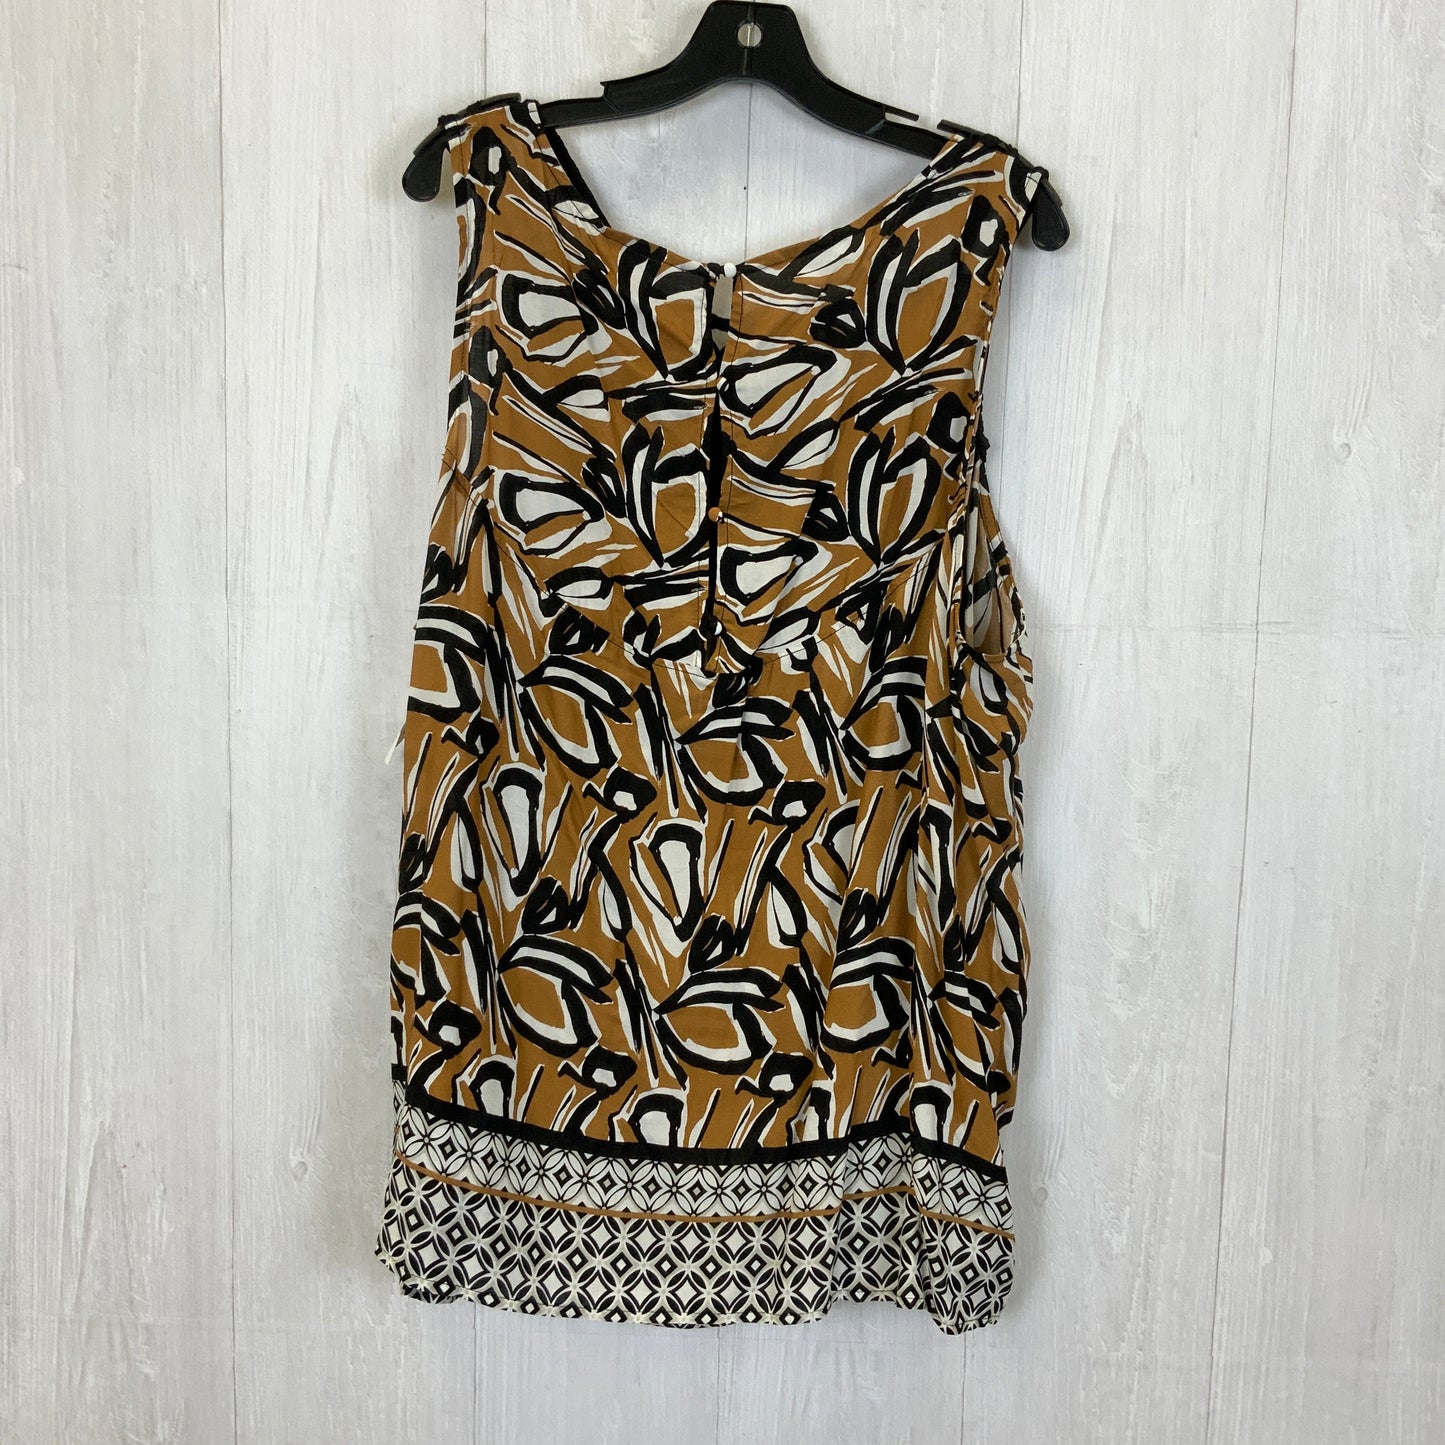 Top Sleeveless By Cato  Size: 4x